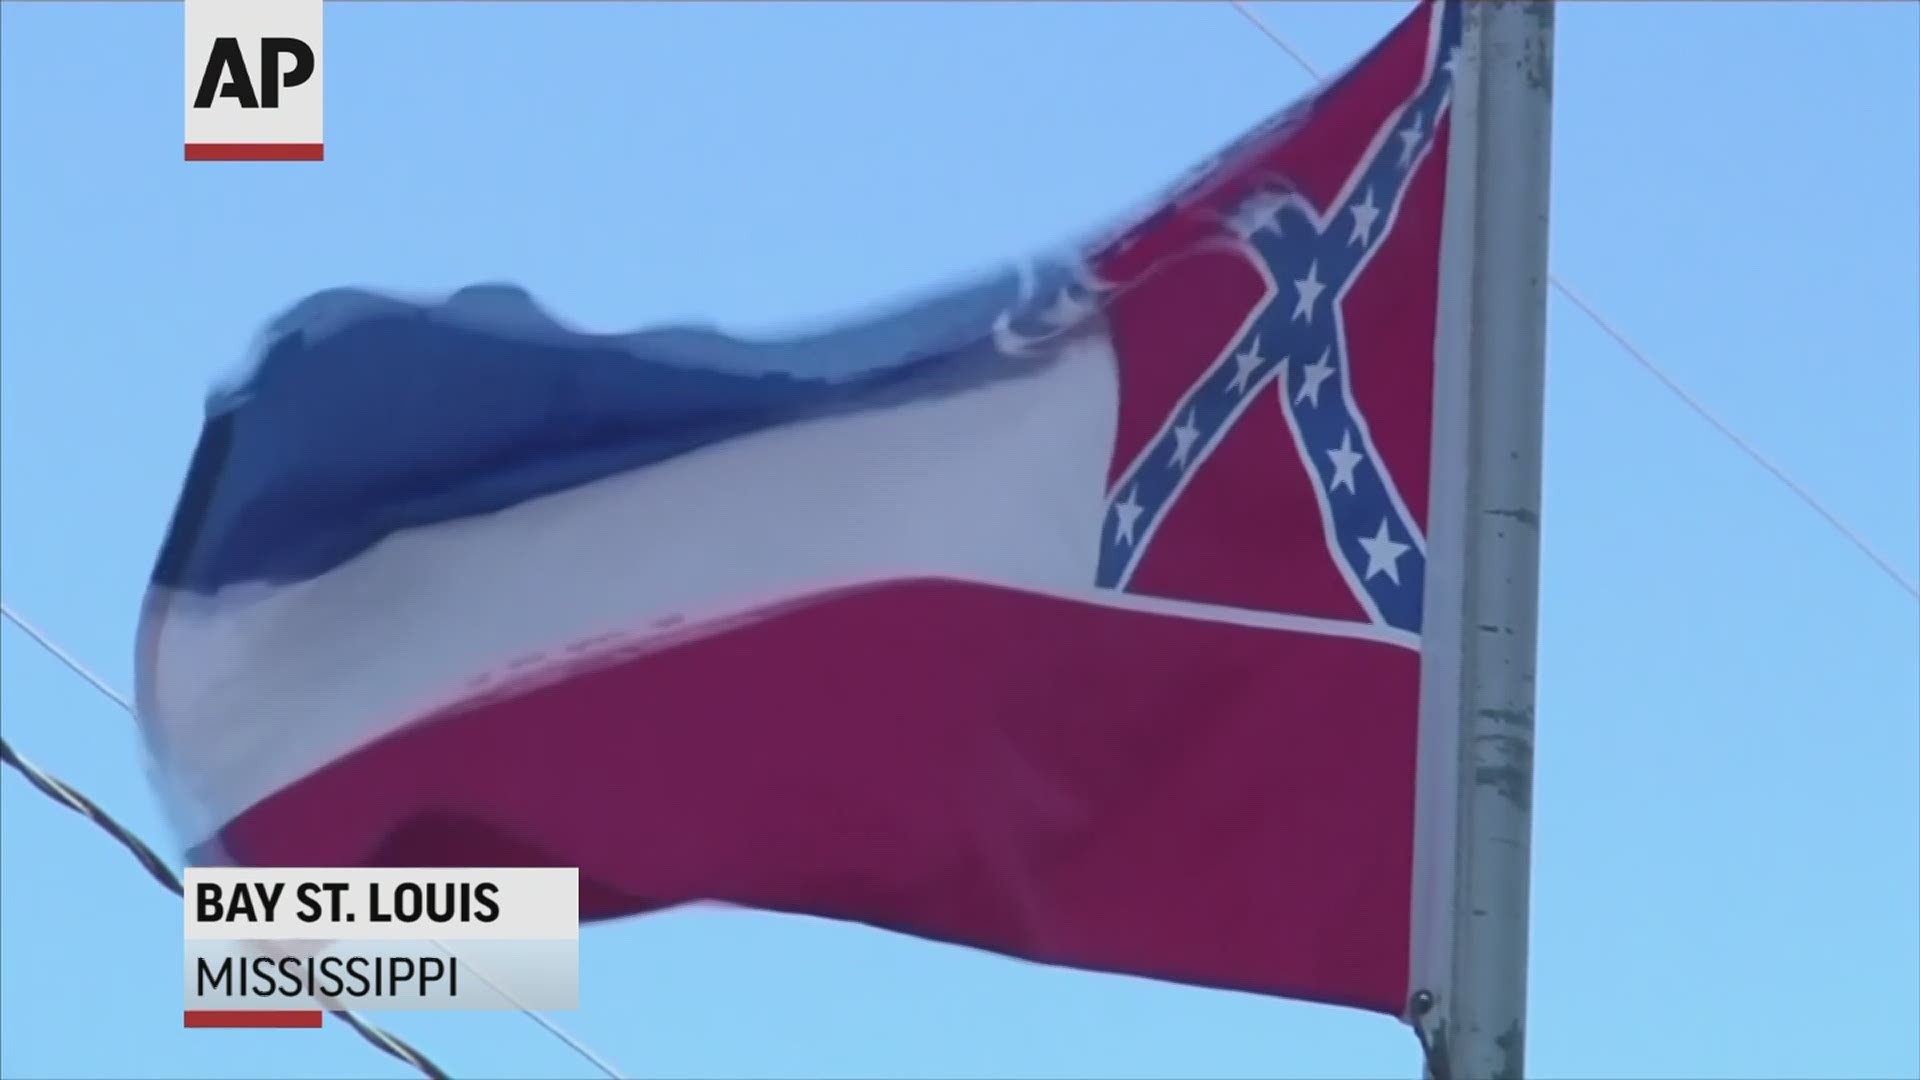 Mississippi lawmakers could vote in the next few days to remove the Confederate battle emblem from the state flag.